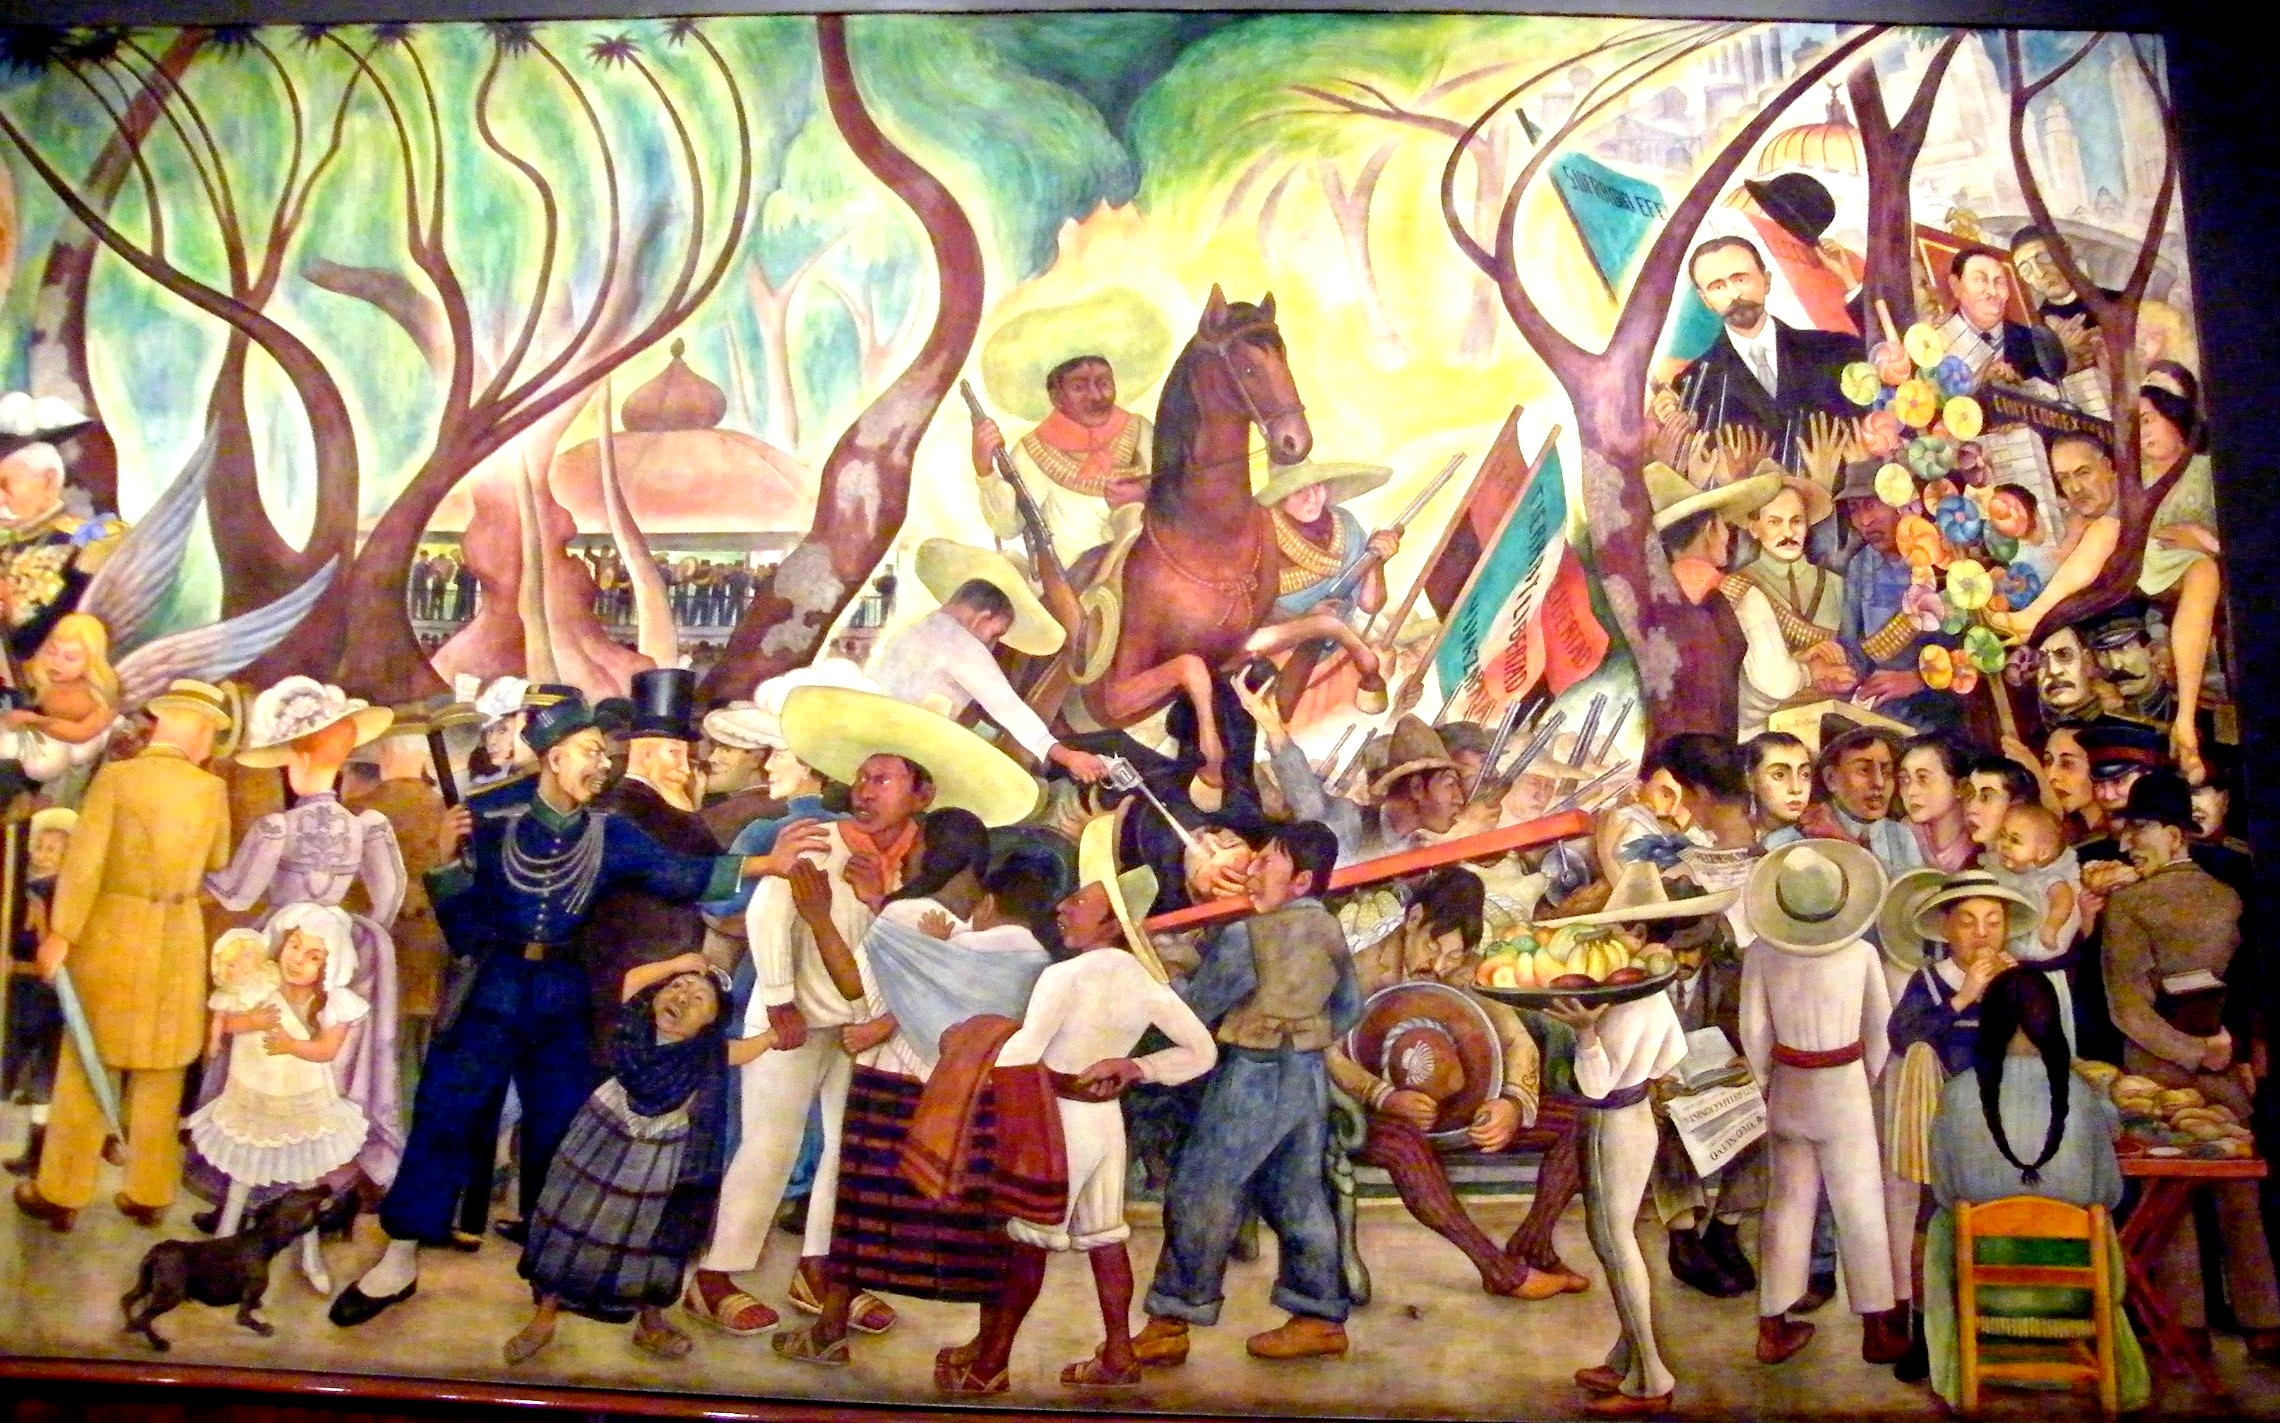 DIEGO RIVERA'S MOST FAMOUS MURAL